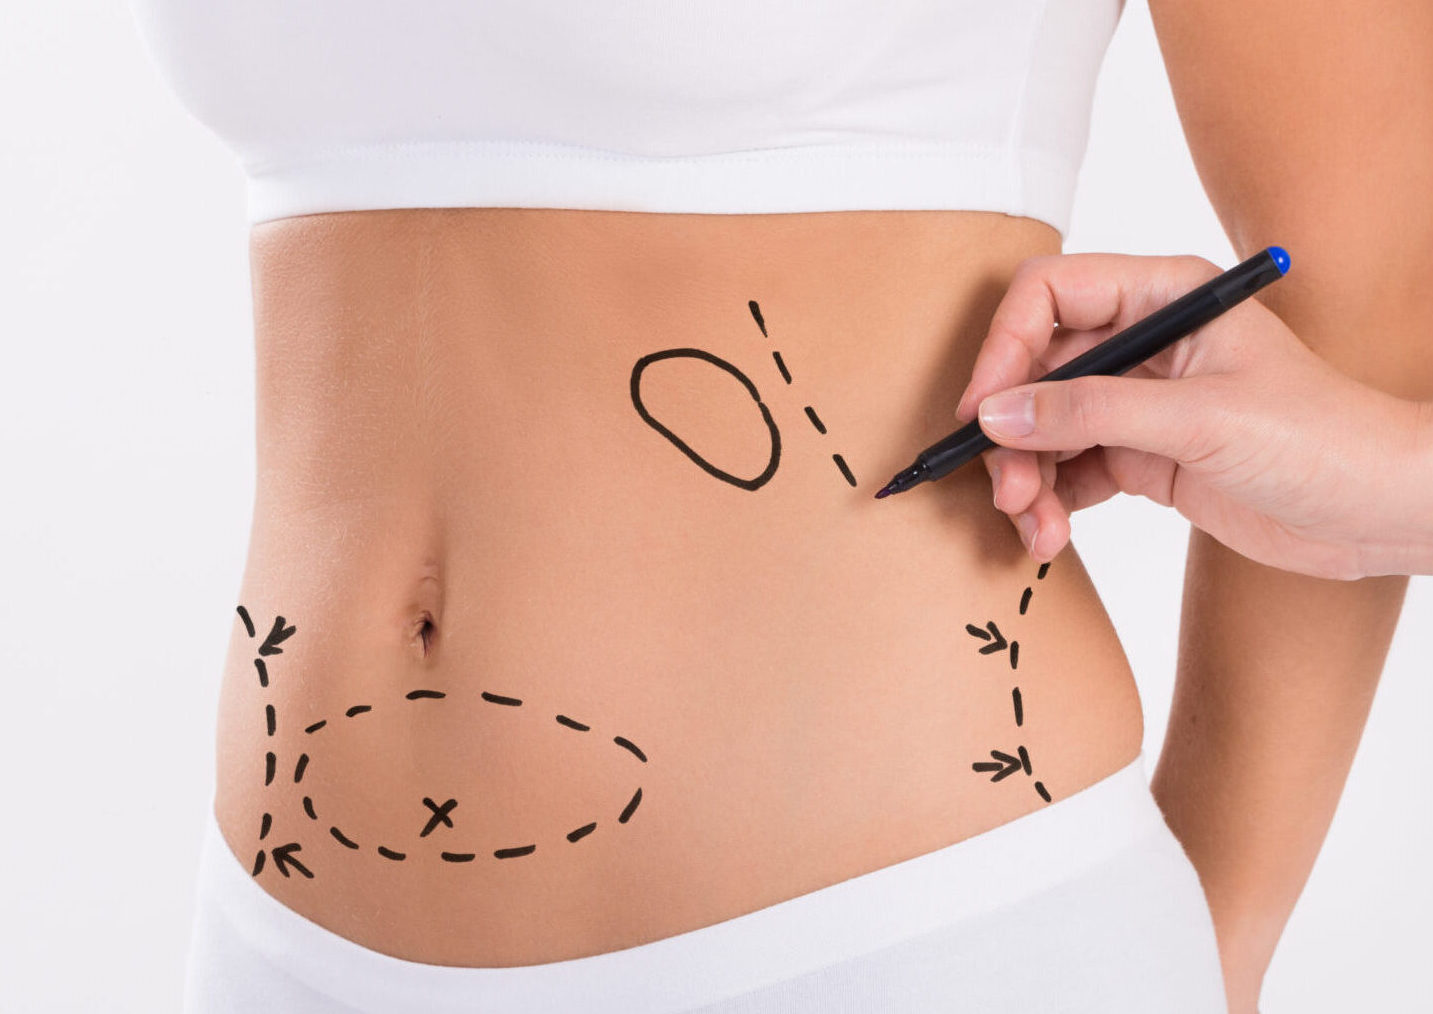 Liposuction (Fat Removal) Surgery at Silkor